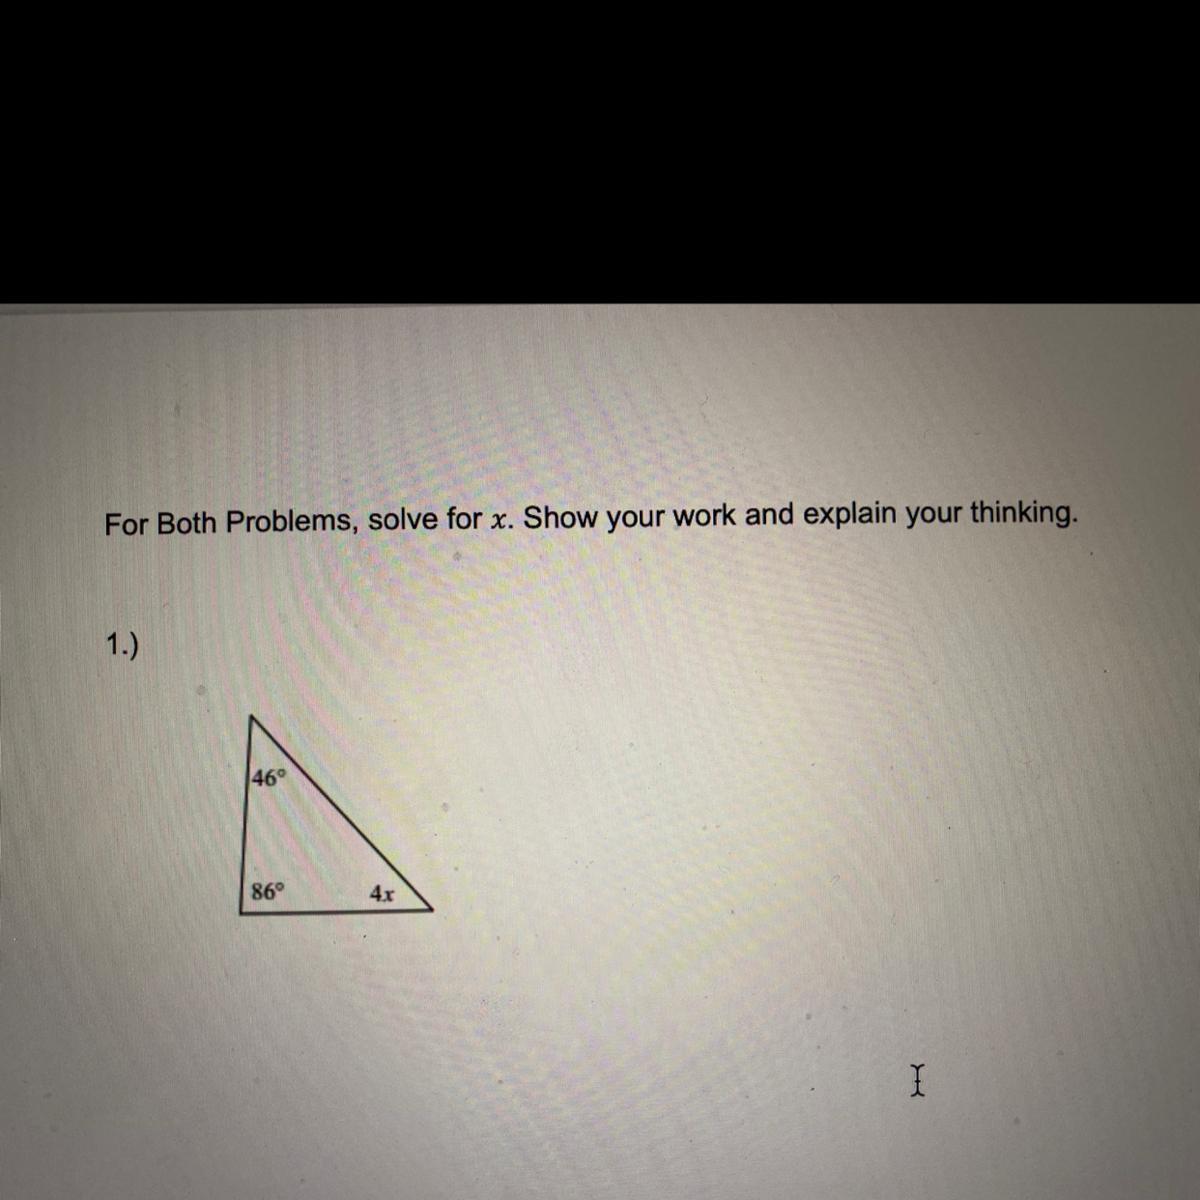 Can Someone Help With This, I Dont Know How To Do It